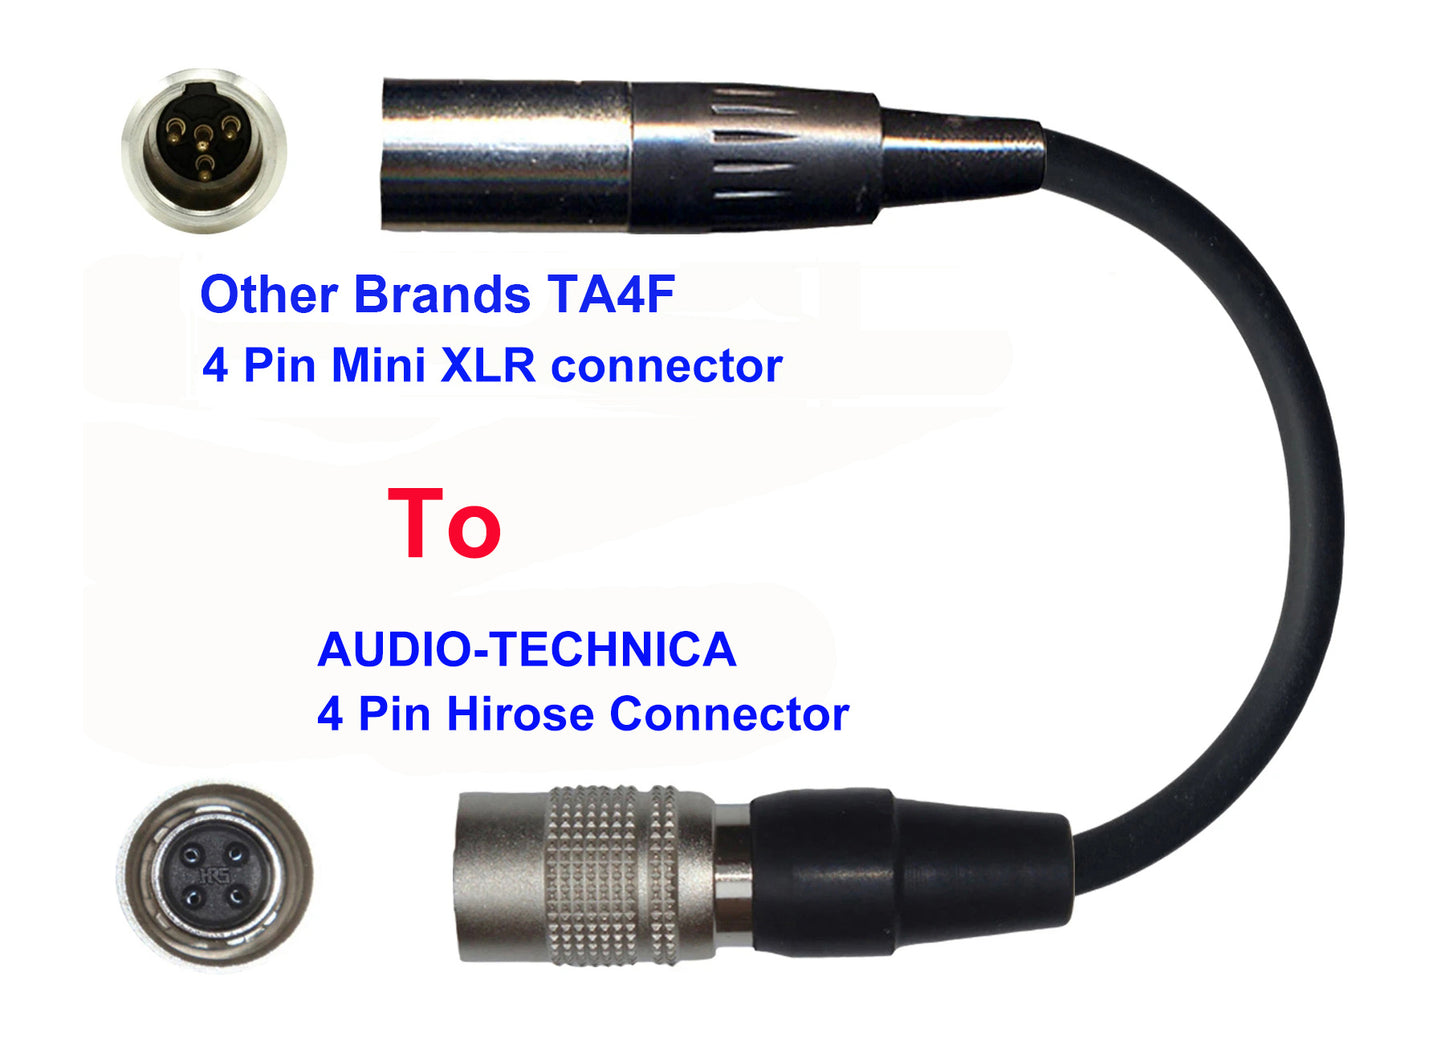 Microphone Adapter - Other Brands Microphones with TA4F 4 pin mini XLR connector TO Audio-Technica Transmitters with Hirose 4 Pin TA4M connector